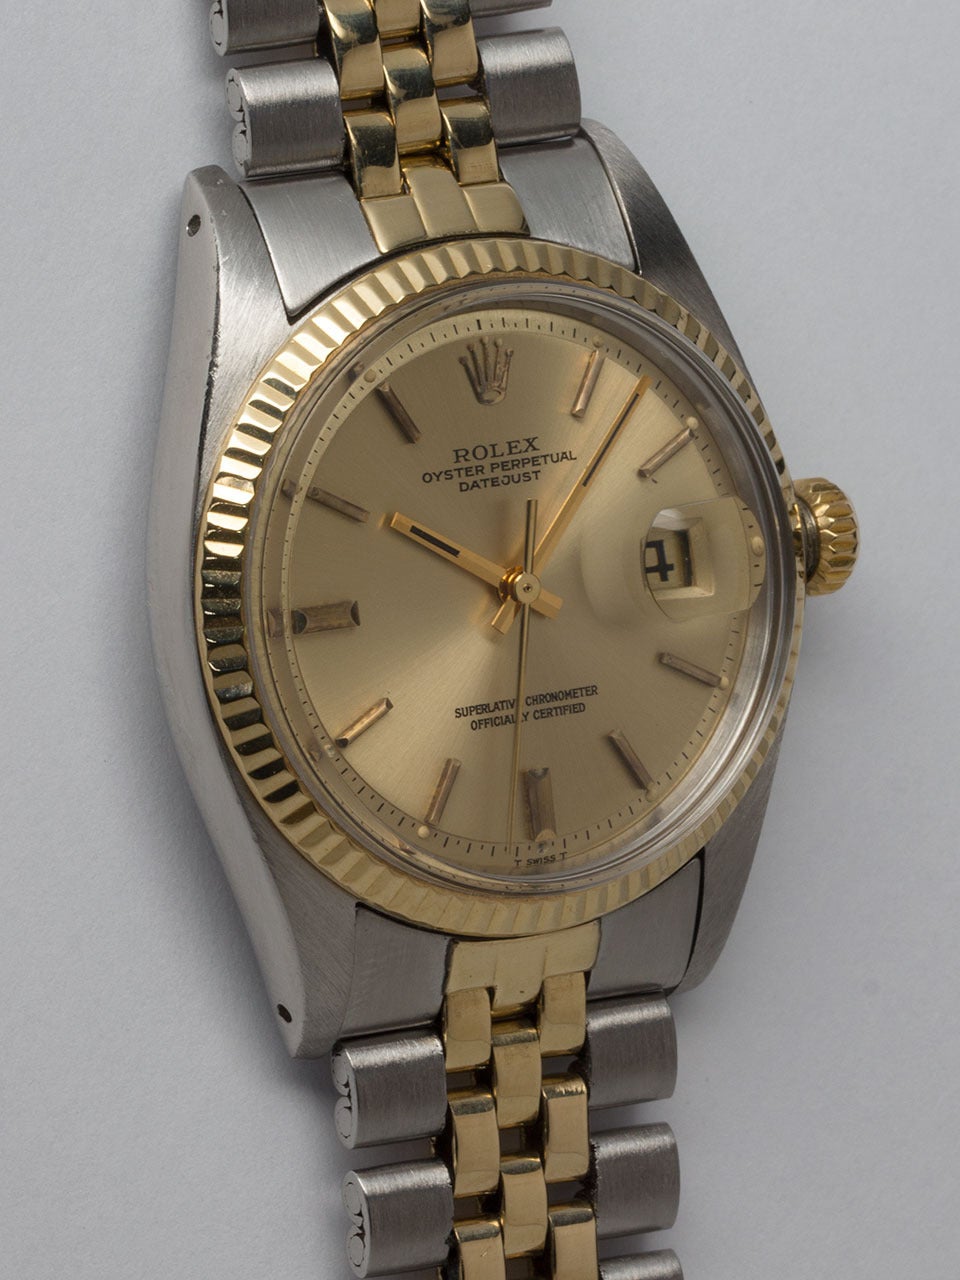 Rolex Stainless Steel and 14K Yellow Gold Datejust Wristwatch ref 1601 serial #3.8 million circa 1972. 36mm diameter case with 14K yellow gold fluted bezel and acrylic crystal. Original champagne pie pan dial with applied gold indexes and gold baton